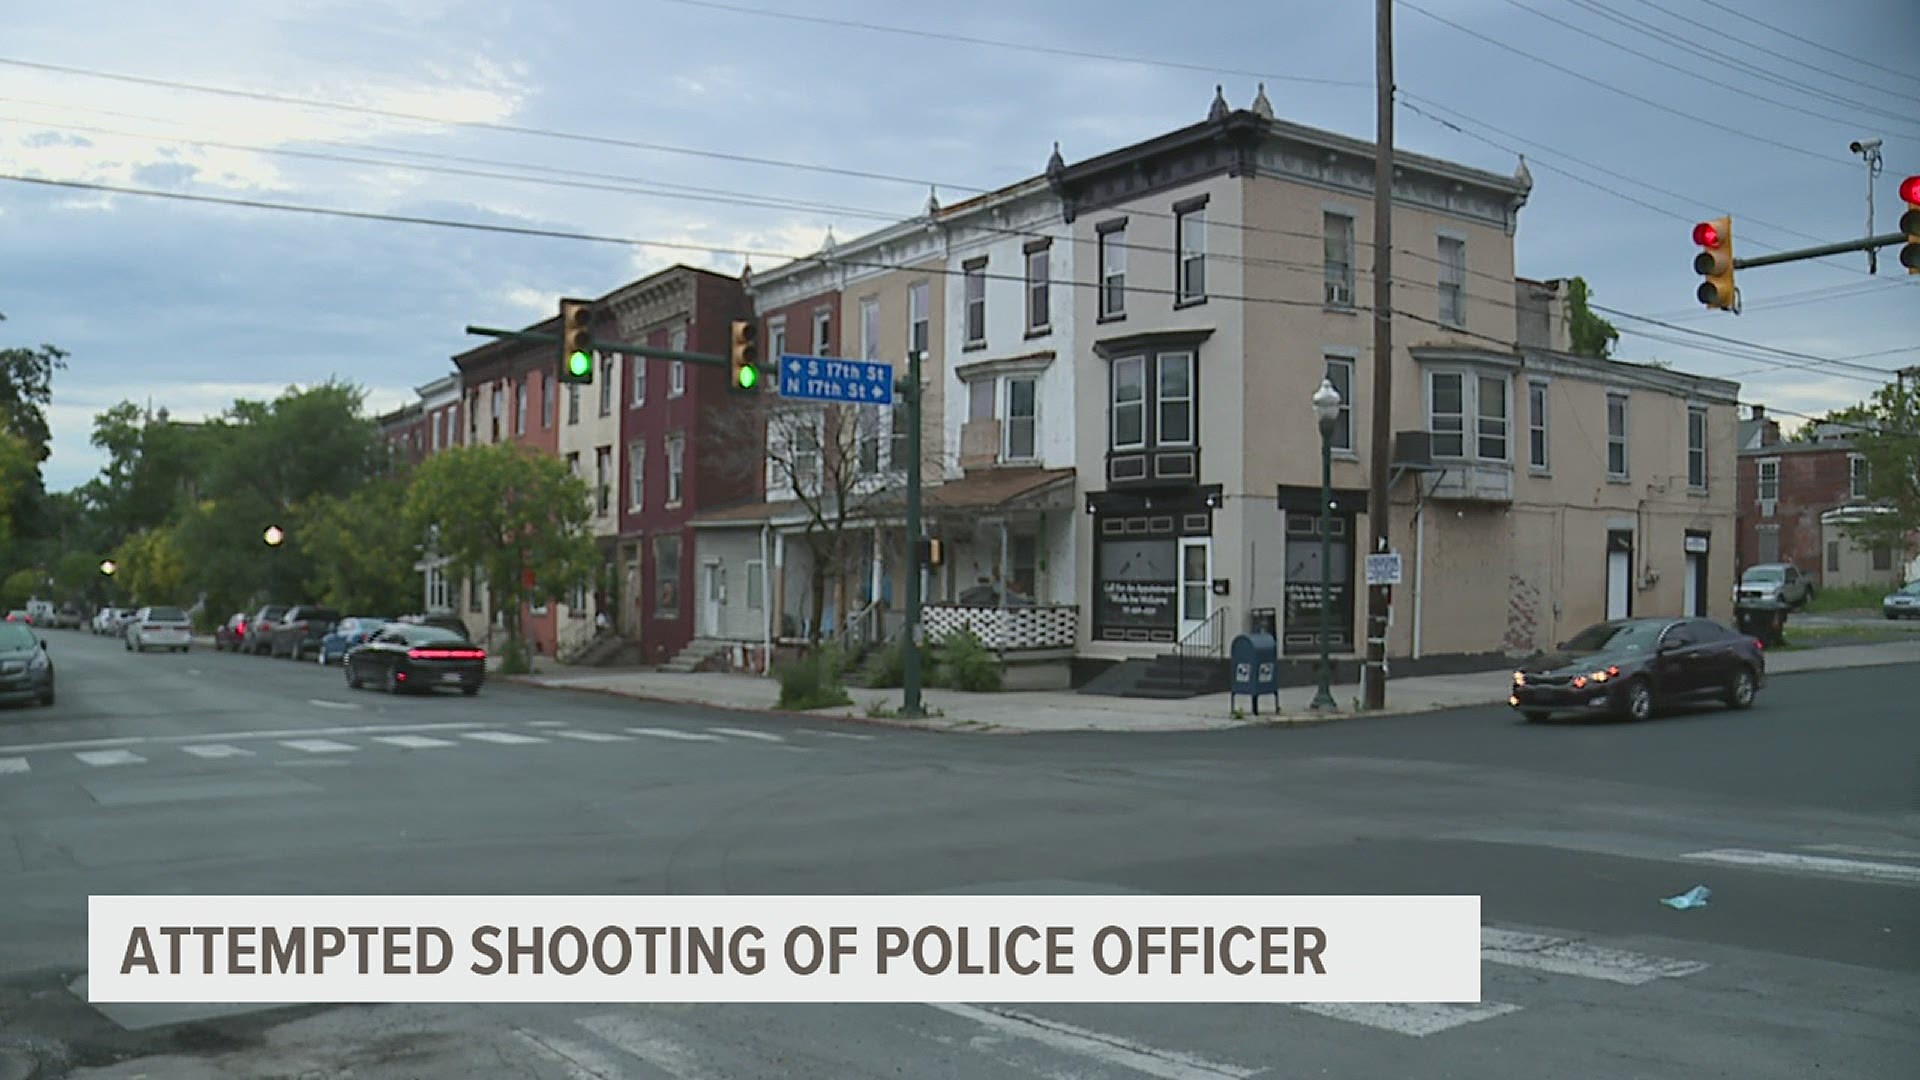 A tragedy averted, when police say a man in this area of Harrisburg tried to shoot two police officers with a rifle.